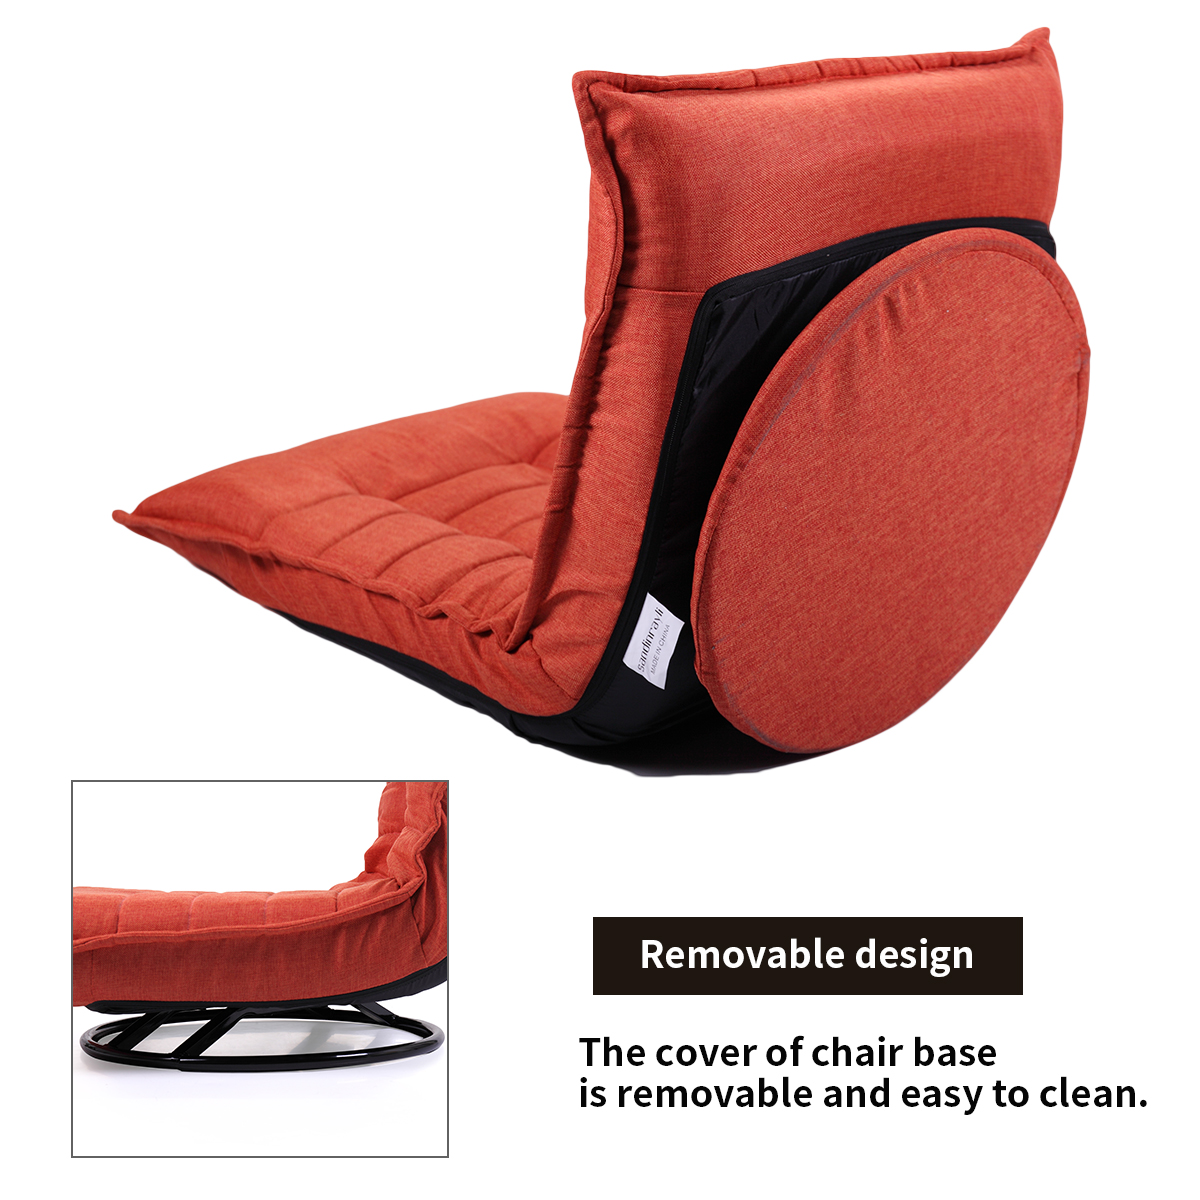 Veryke Lounge Chair, Red - image 5 of 6